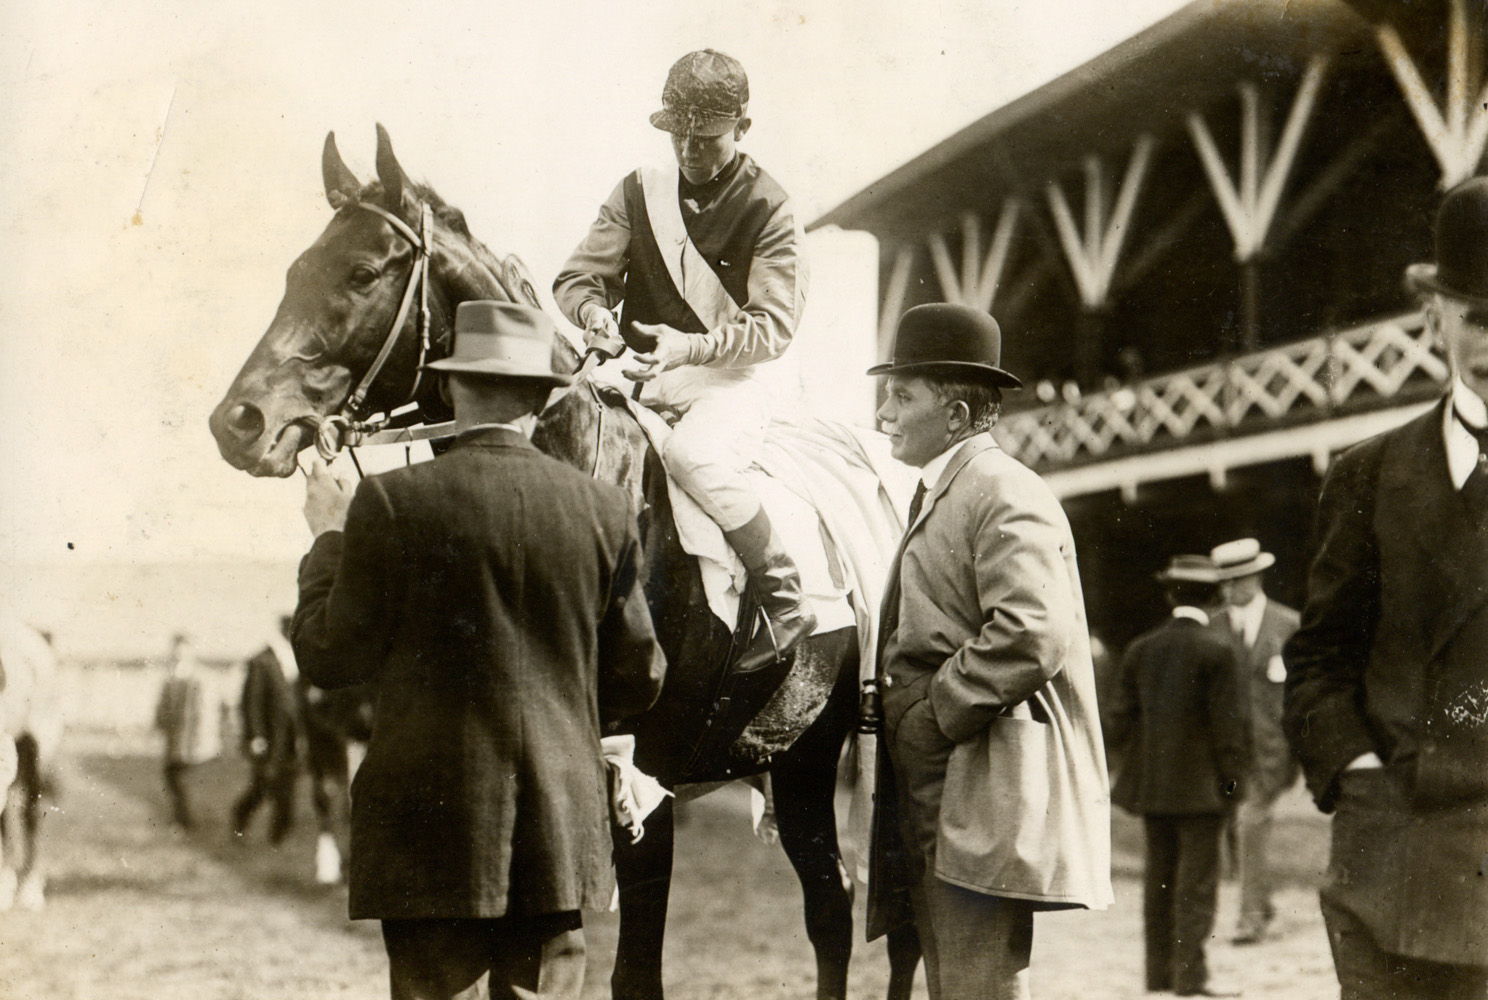 Trainer Sam Hildreth with his horse Fitz Herbert (Eddie Dugan up) at Gravesend in 1908 (Museum Collection)